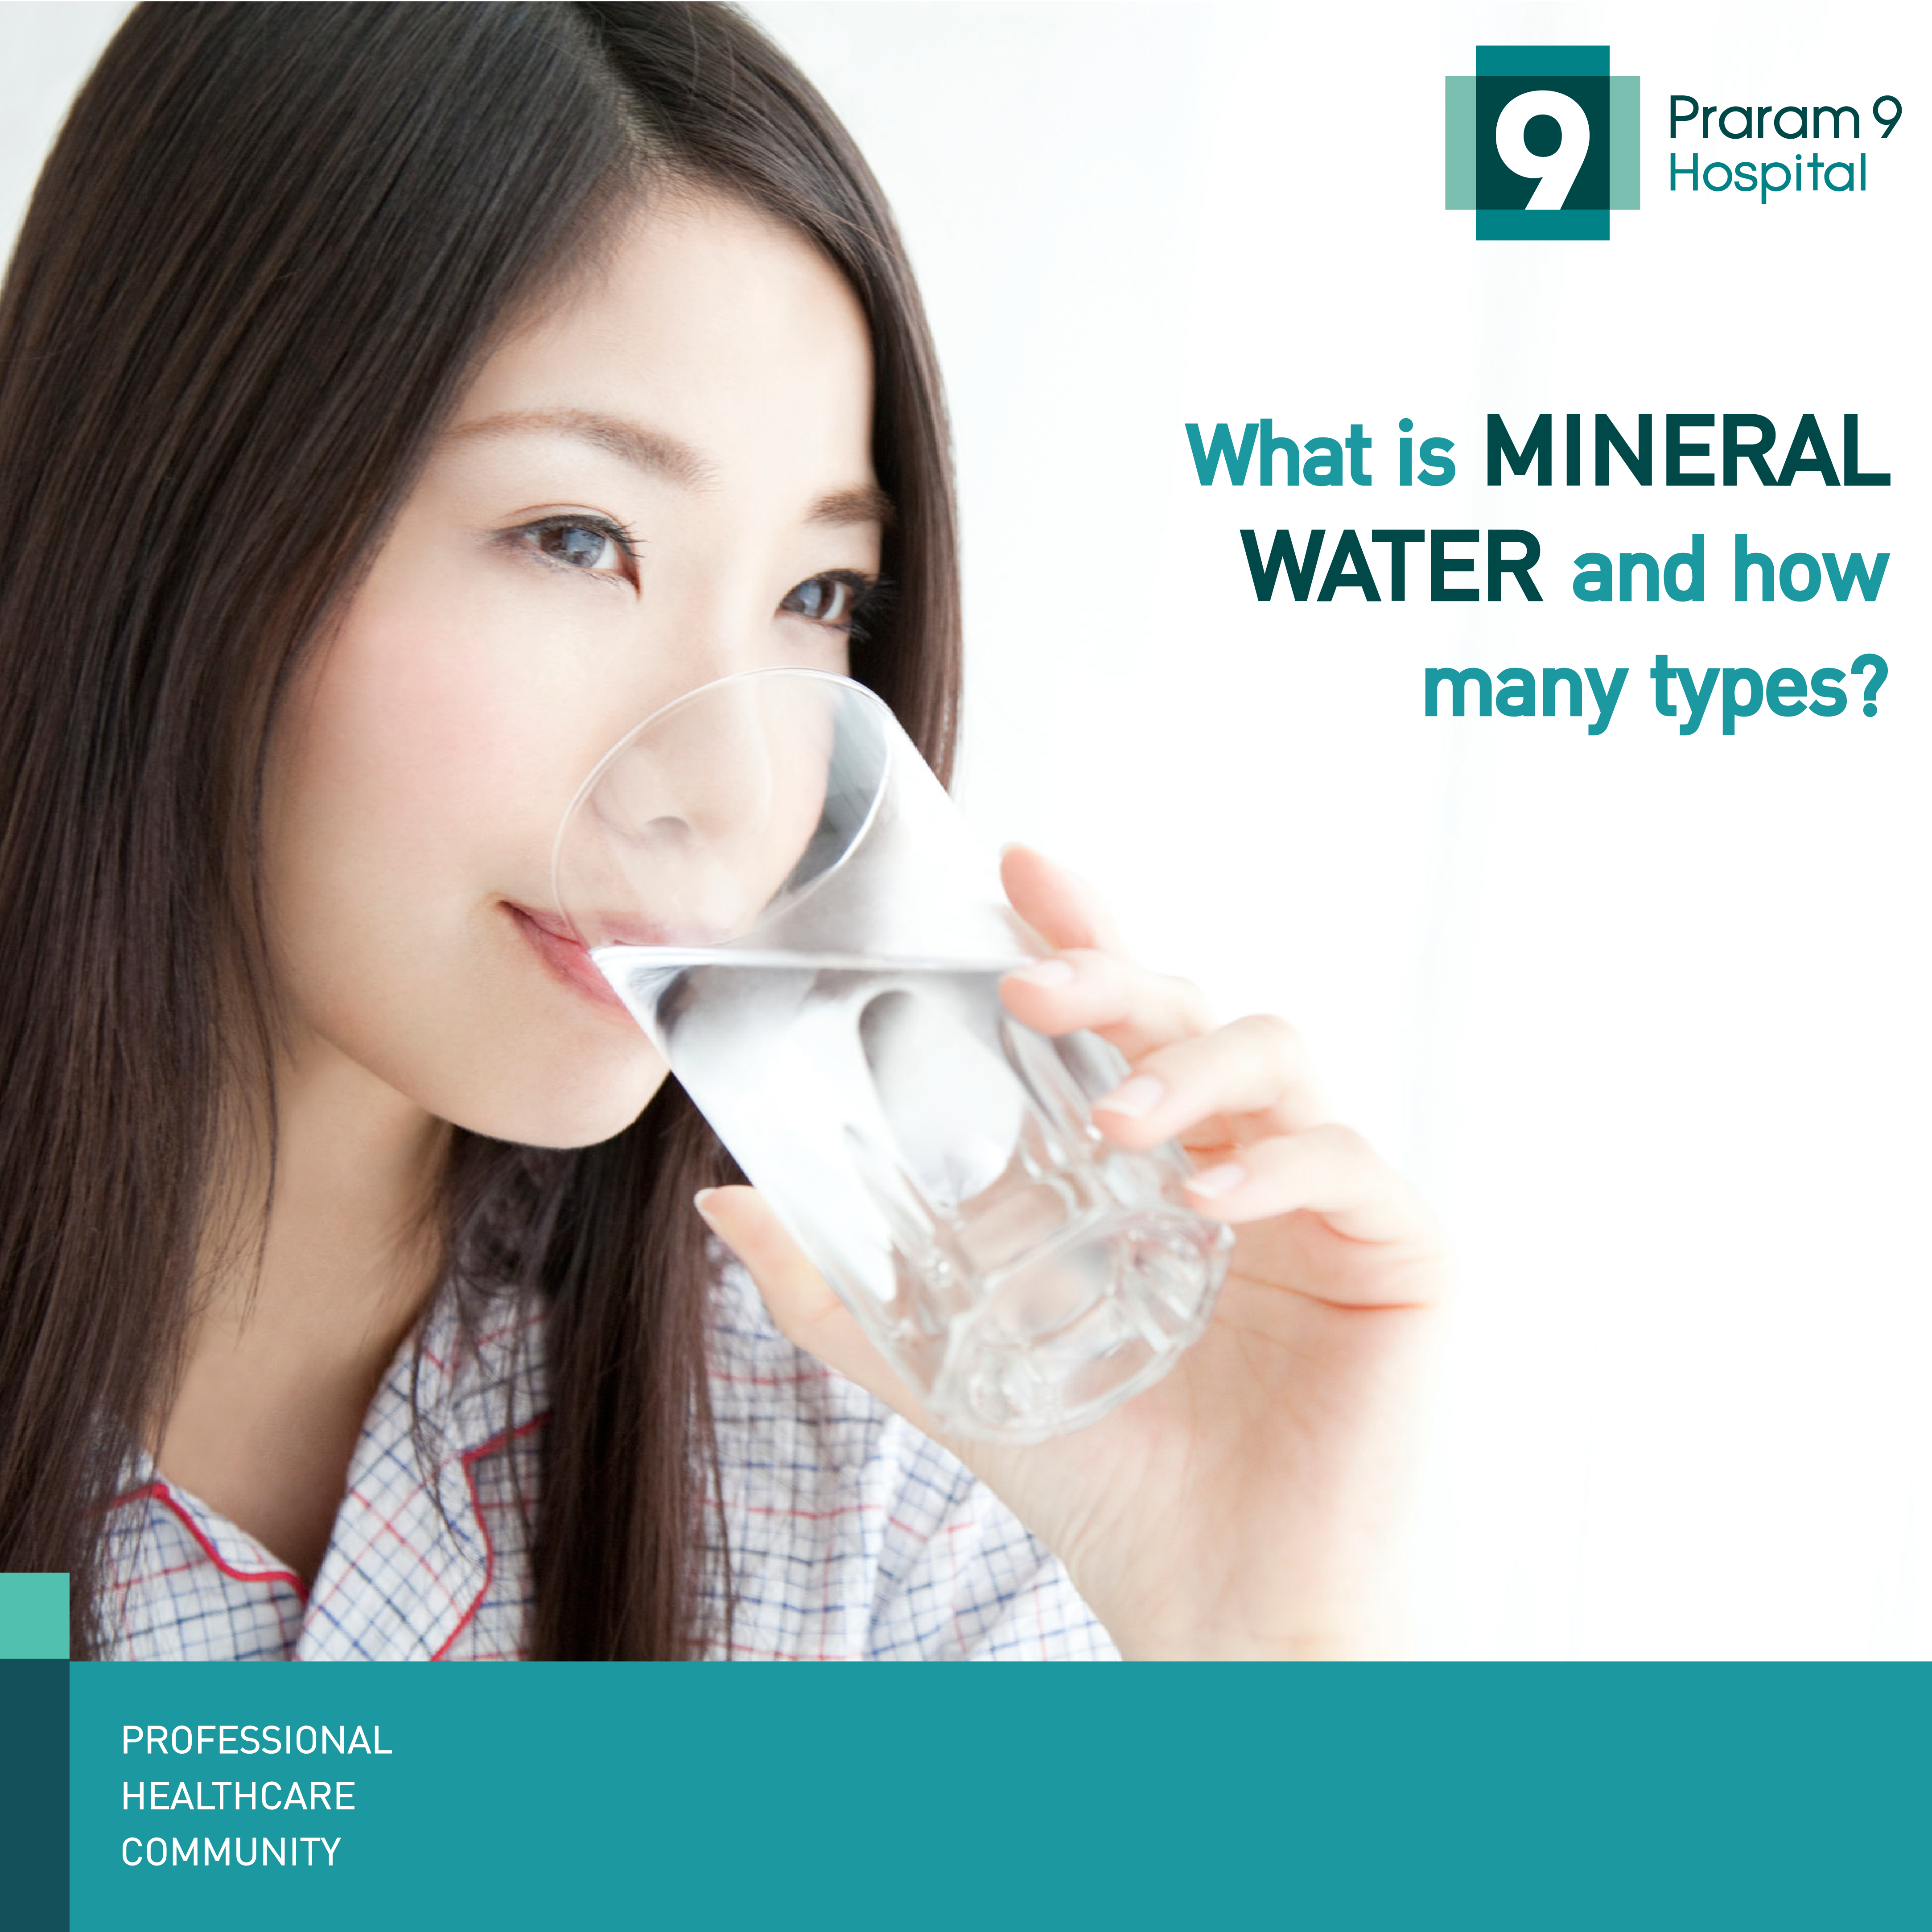 mineral water